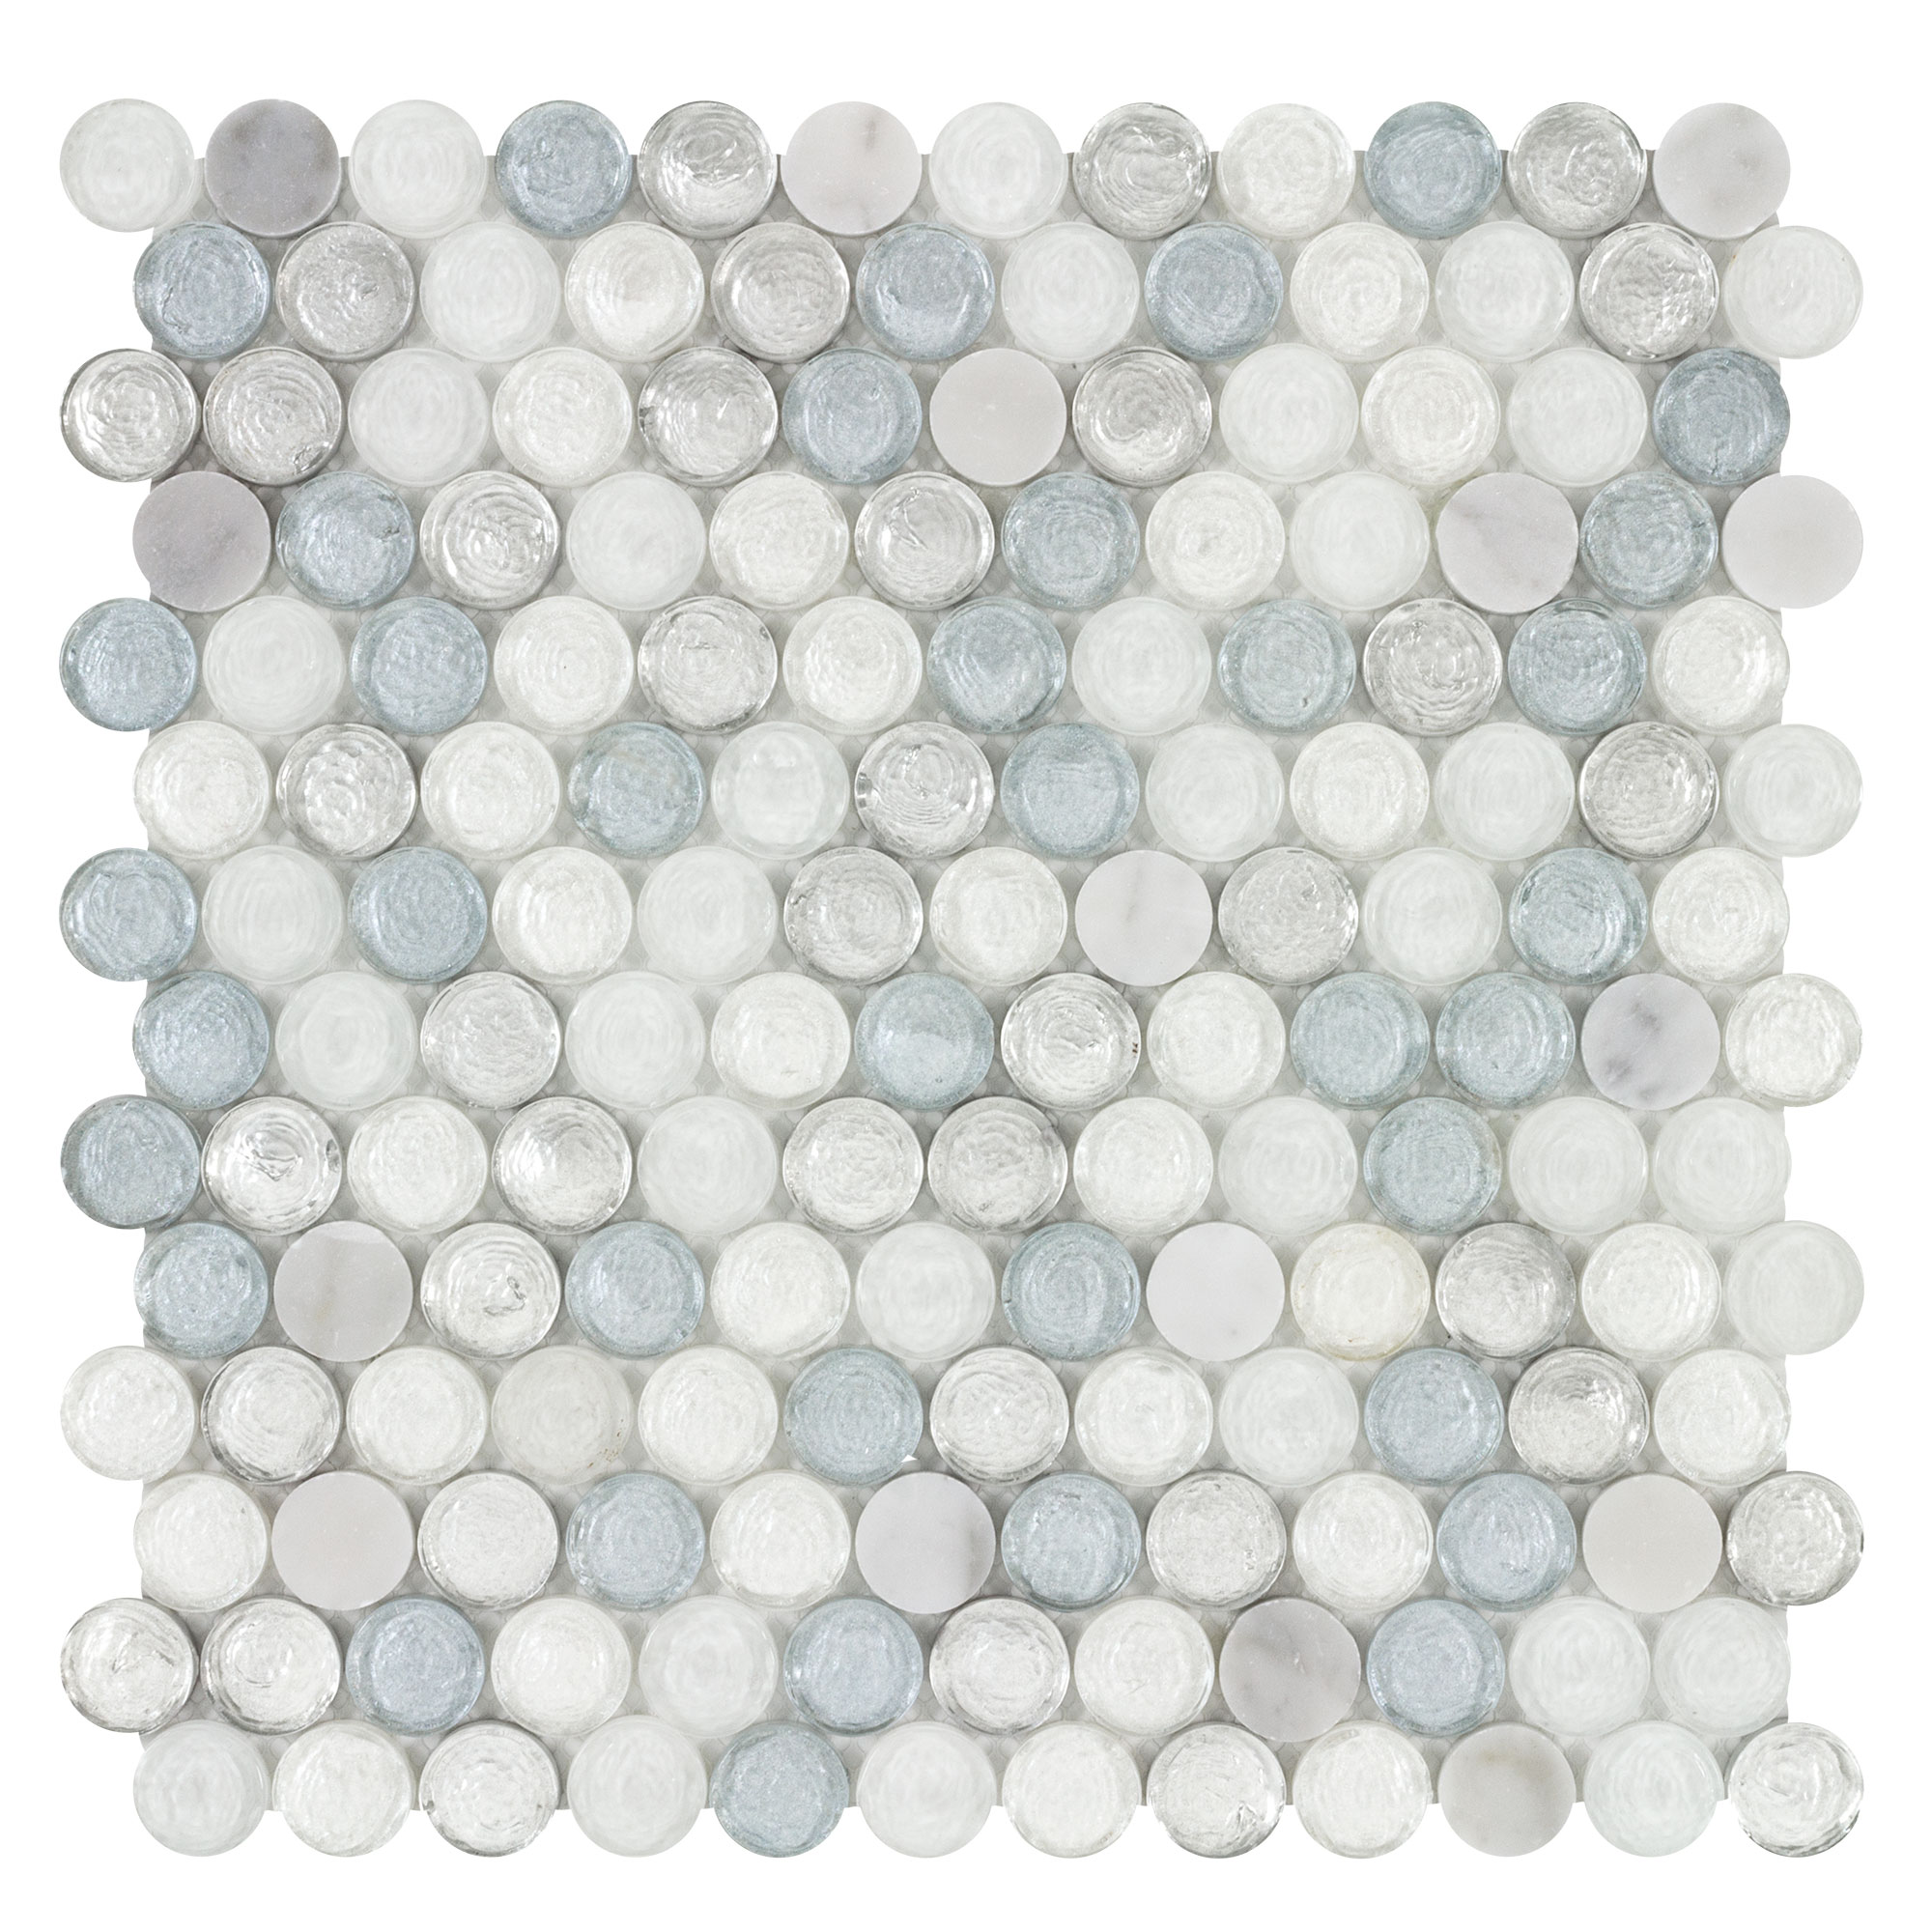 Persian Sun Chic Anthology Tile | Countertops, Cost, Reviews